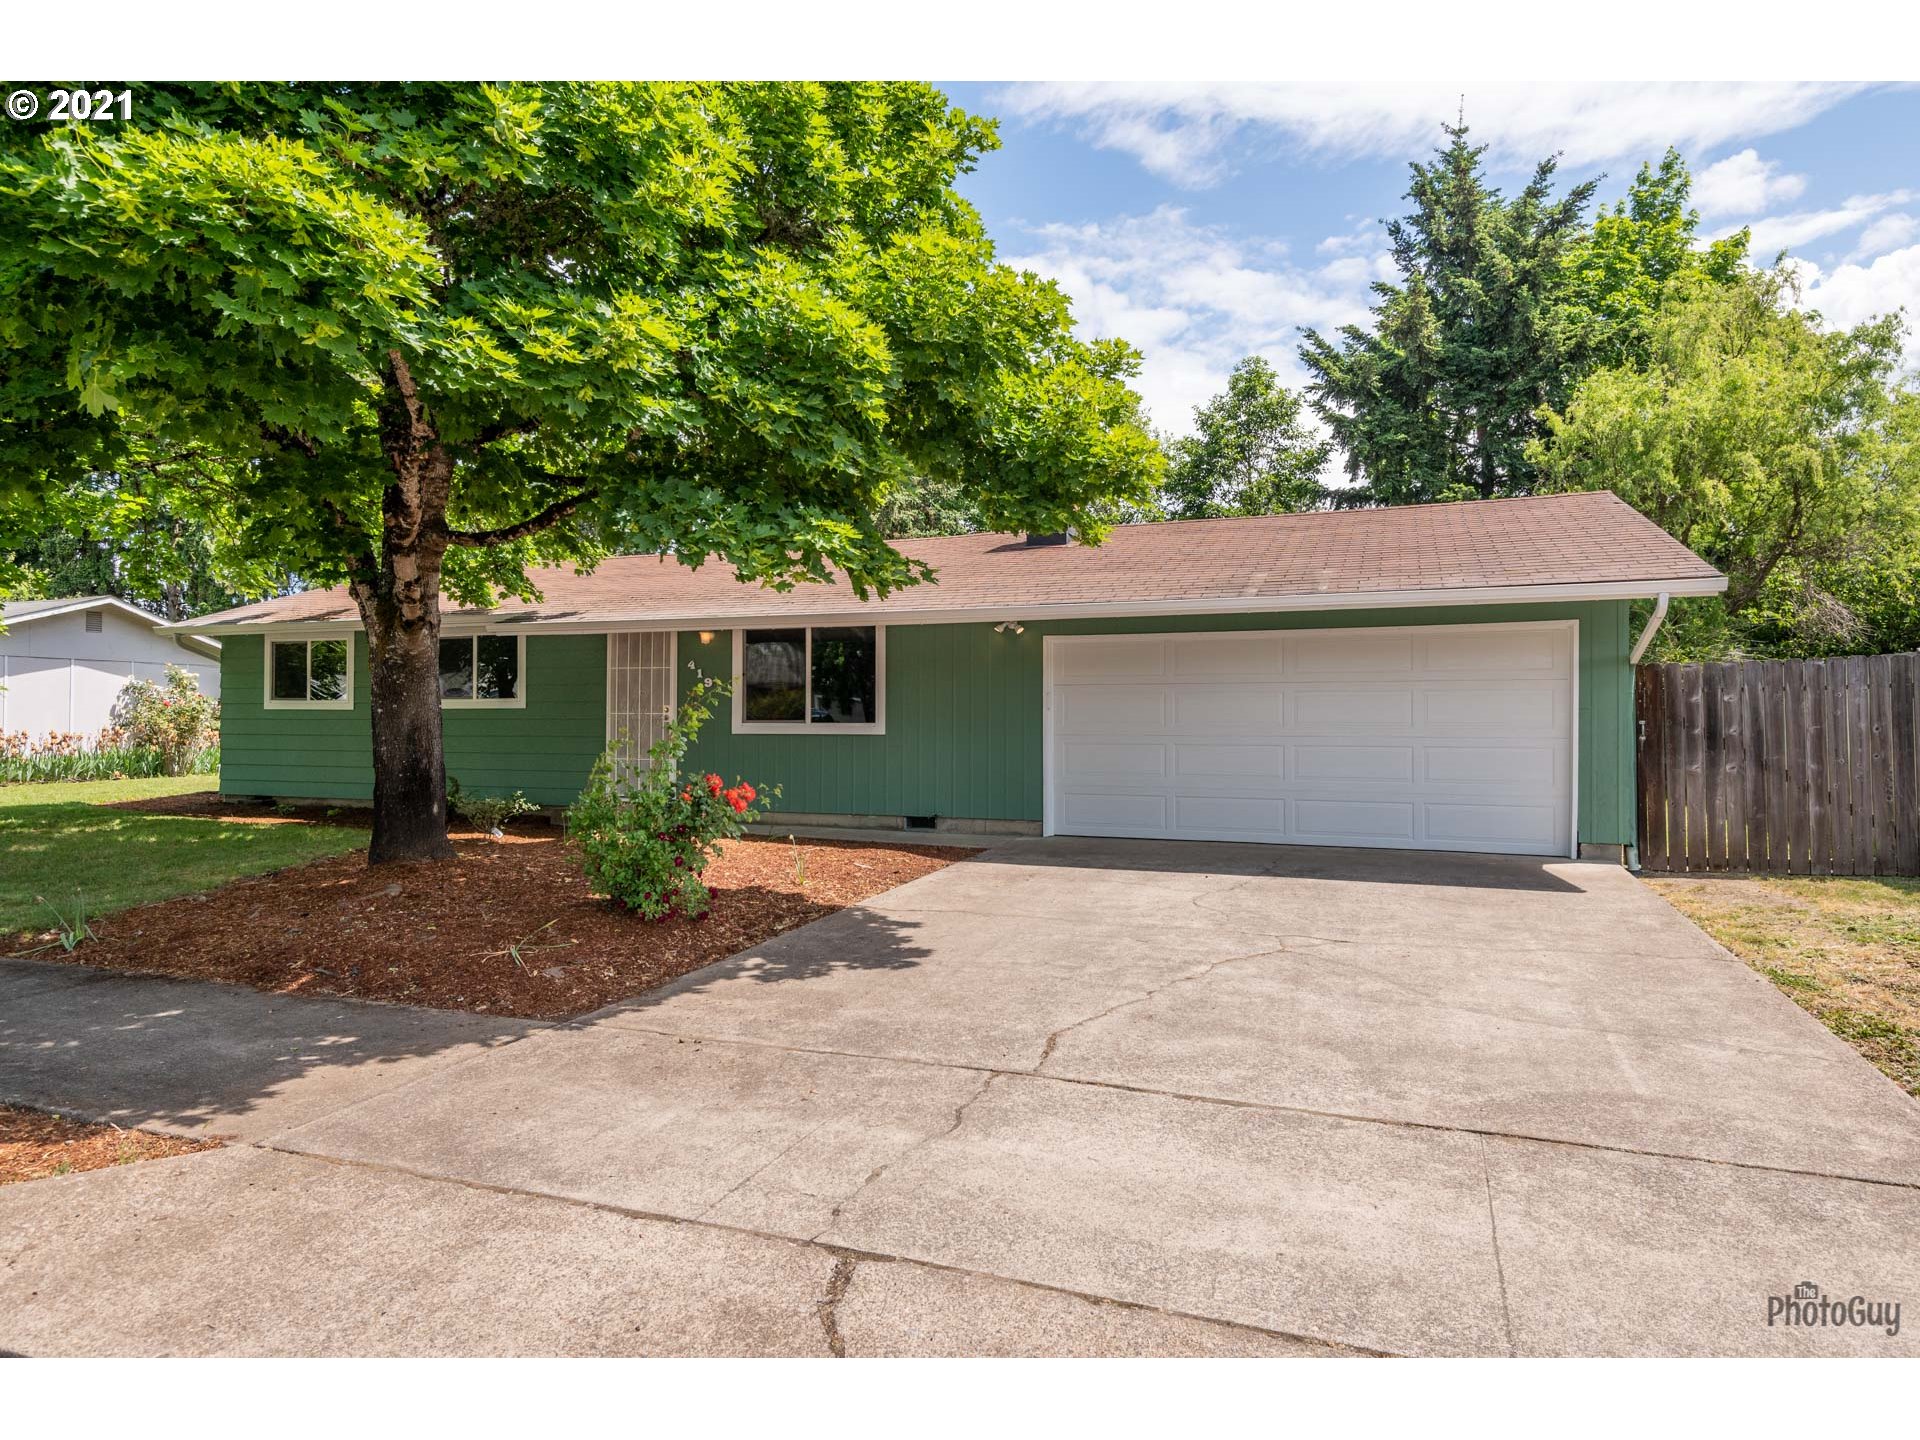 419 S 43rd PL (1 of 27)